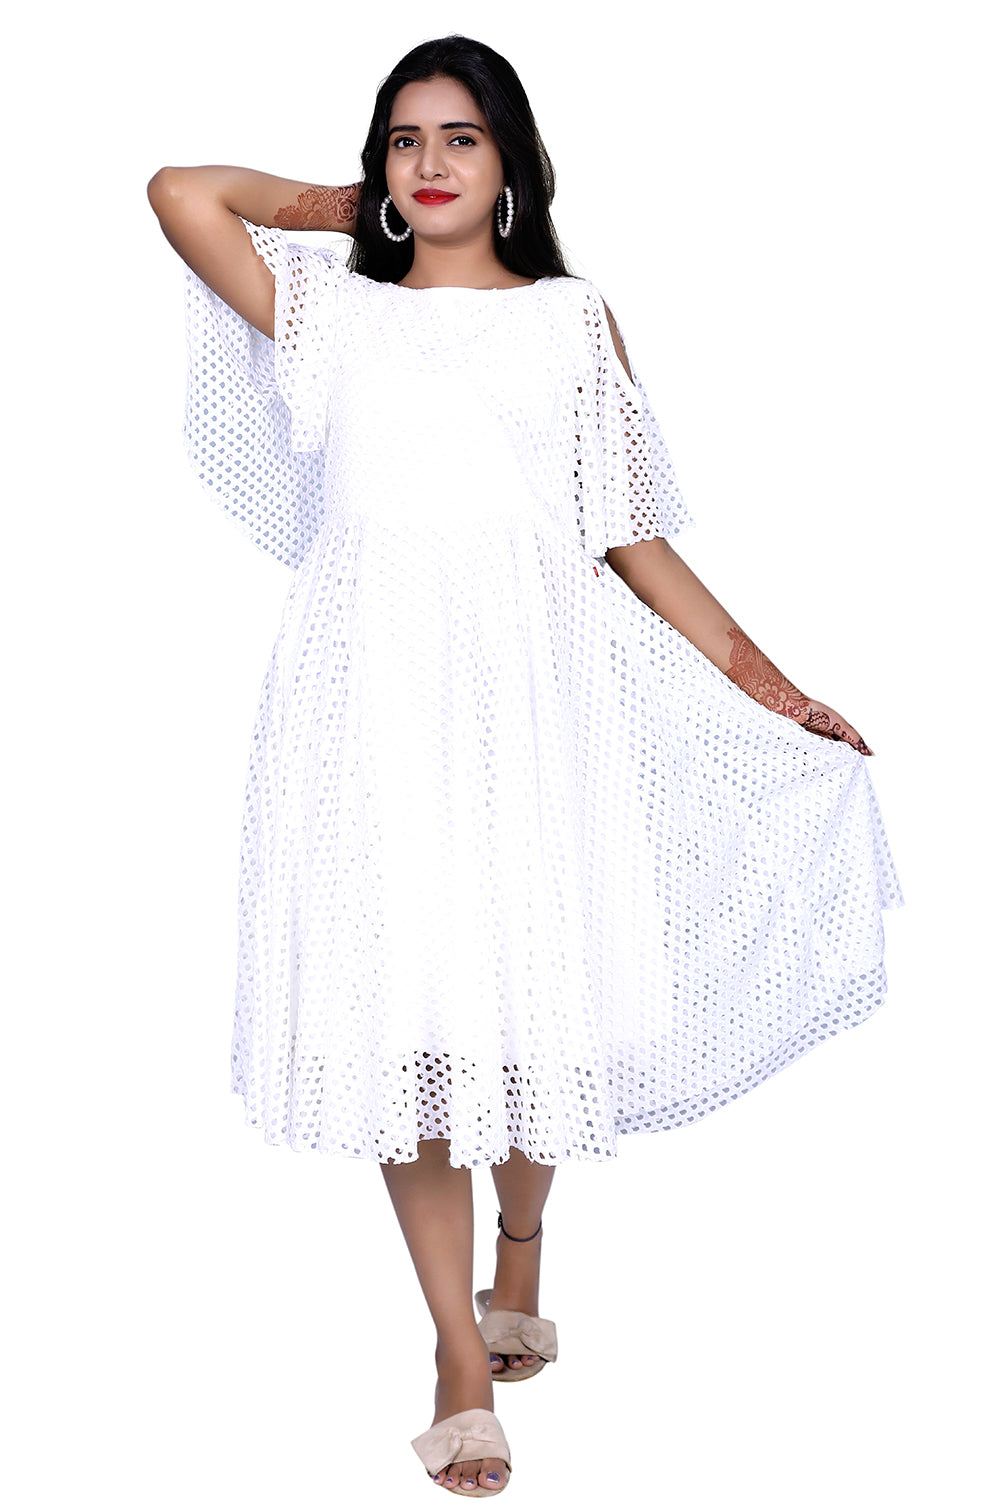 White Color Net Dress Material Fabric for Women's Gown - Charu Creation